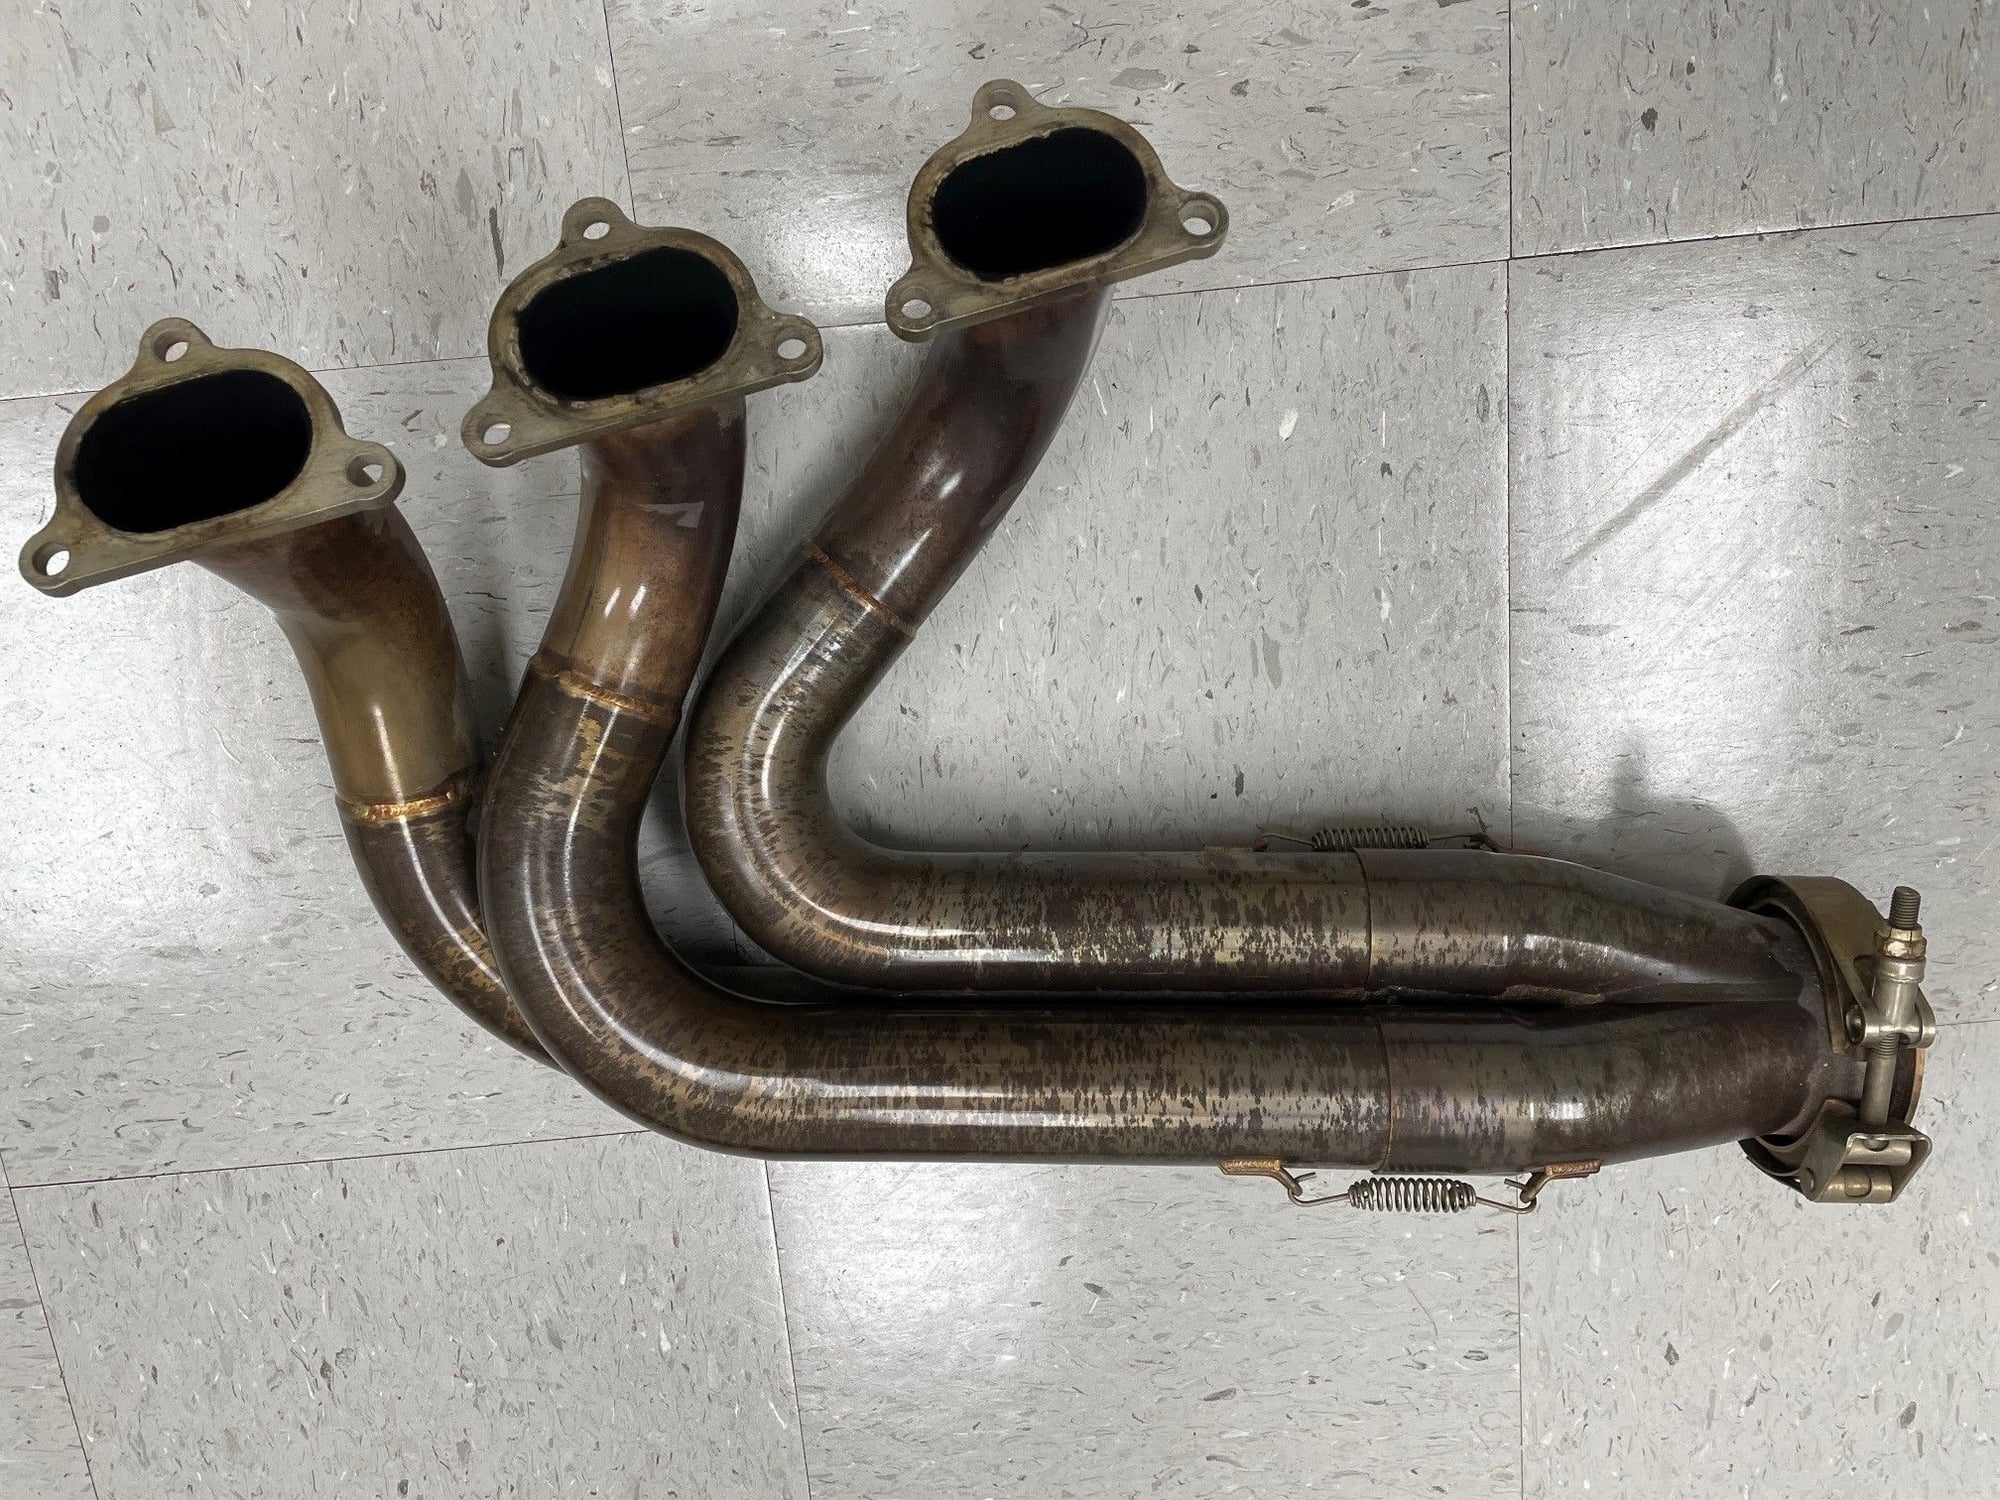 Engine - Exhaust - DUNDON Motorsports RACE HEADER / MUFFLER Power Package for 991.1 GT3 - Used - 2015 to 2017 Porsche GT3 - Louisville, KY 40299, United States